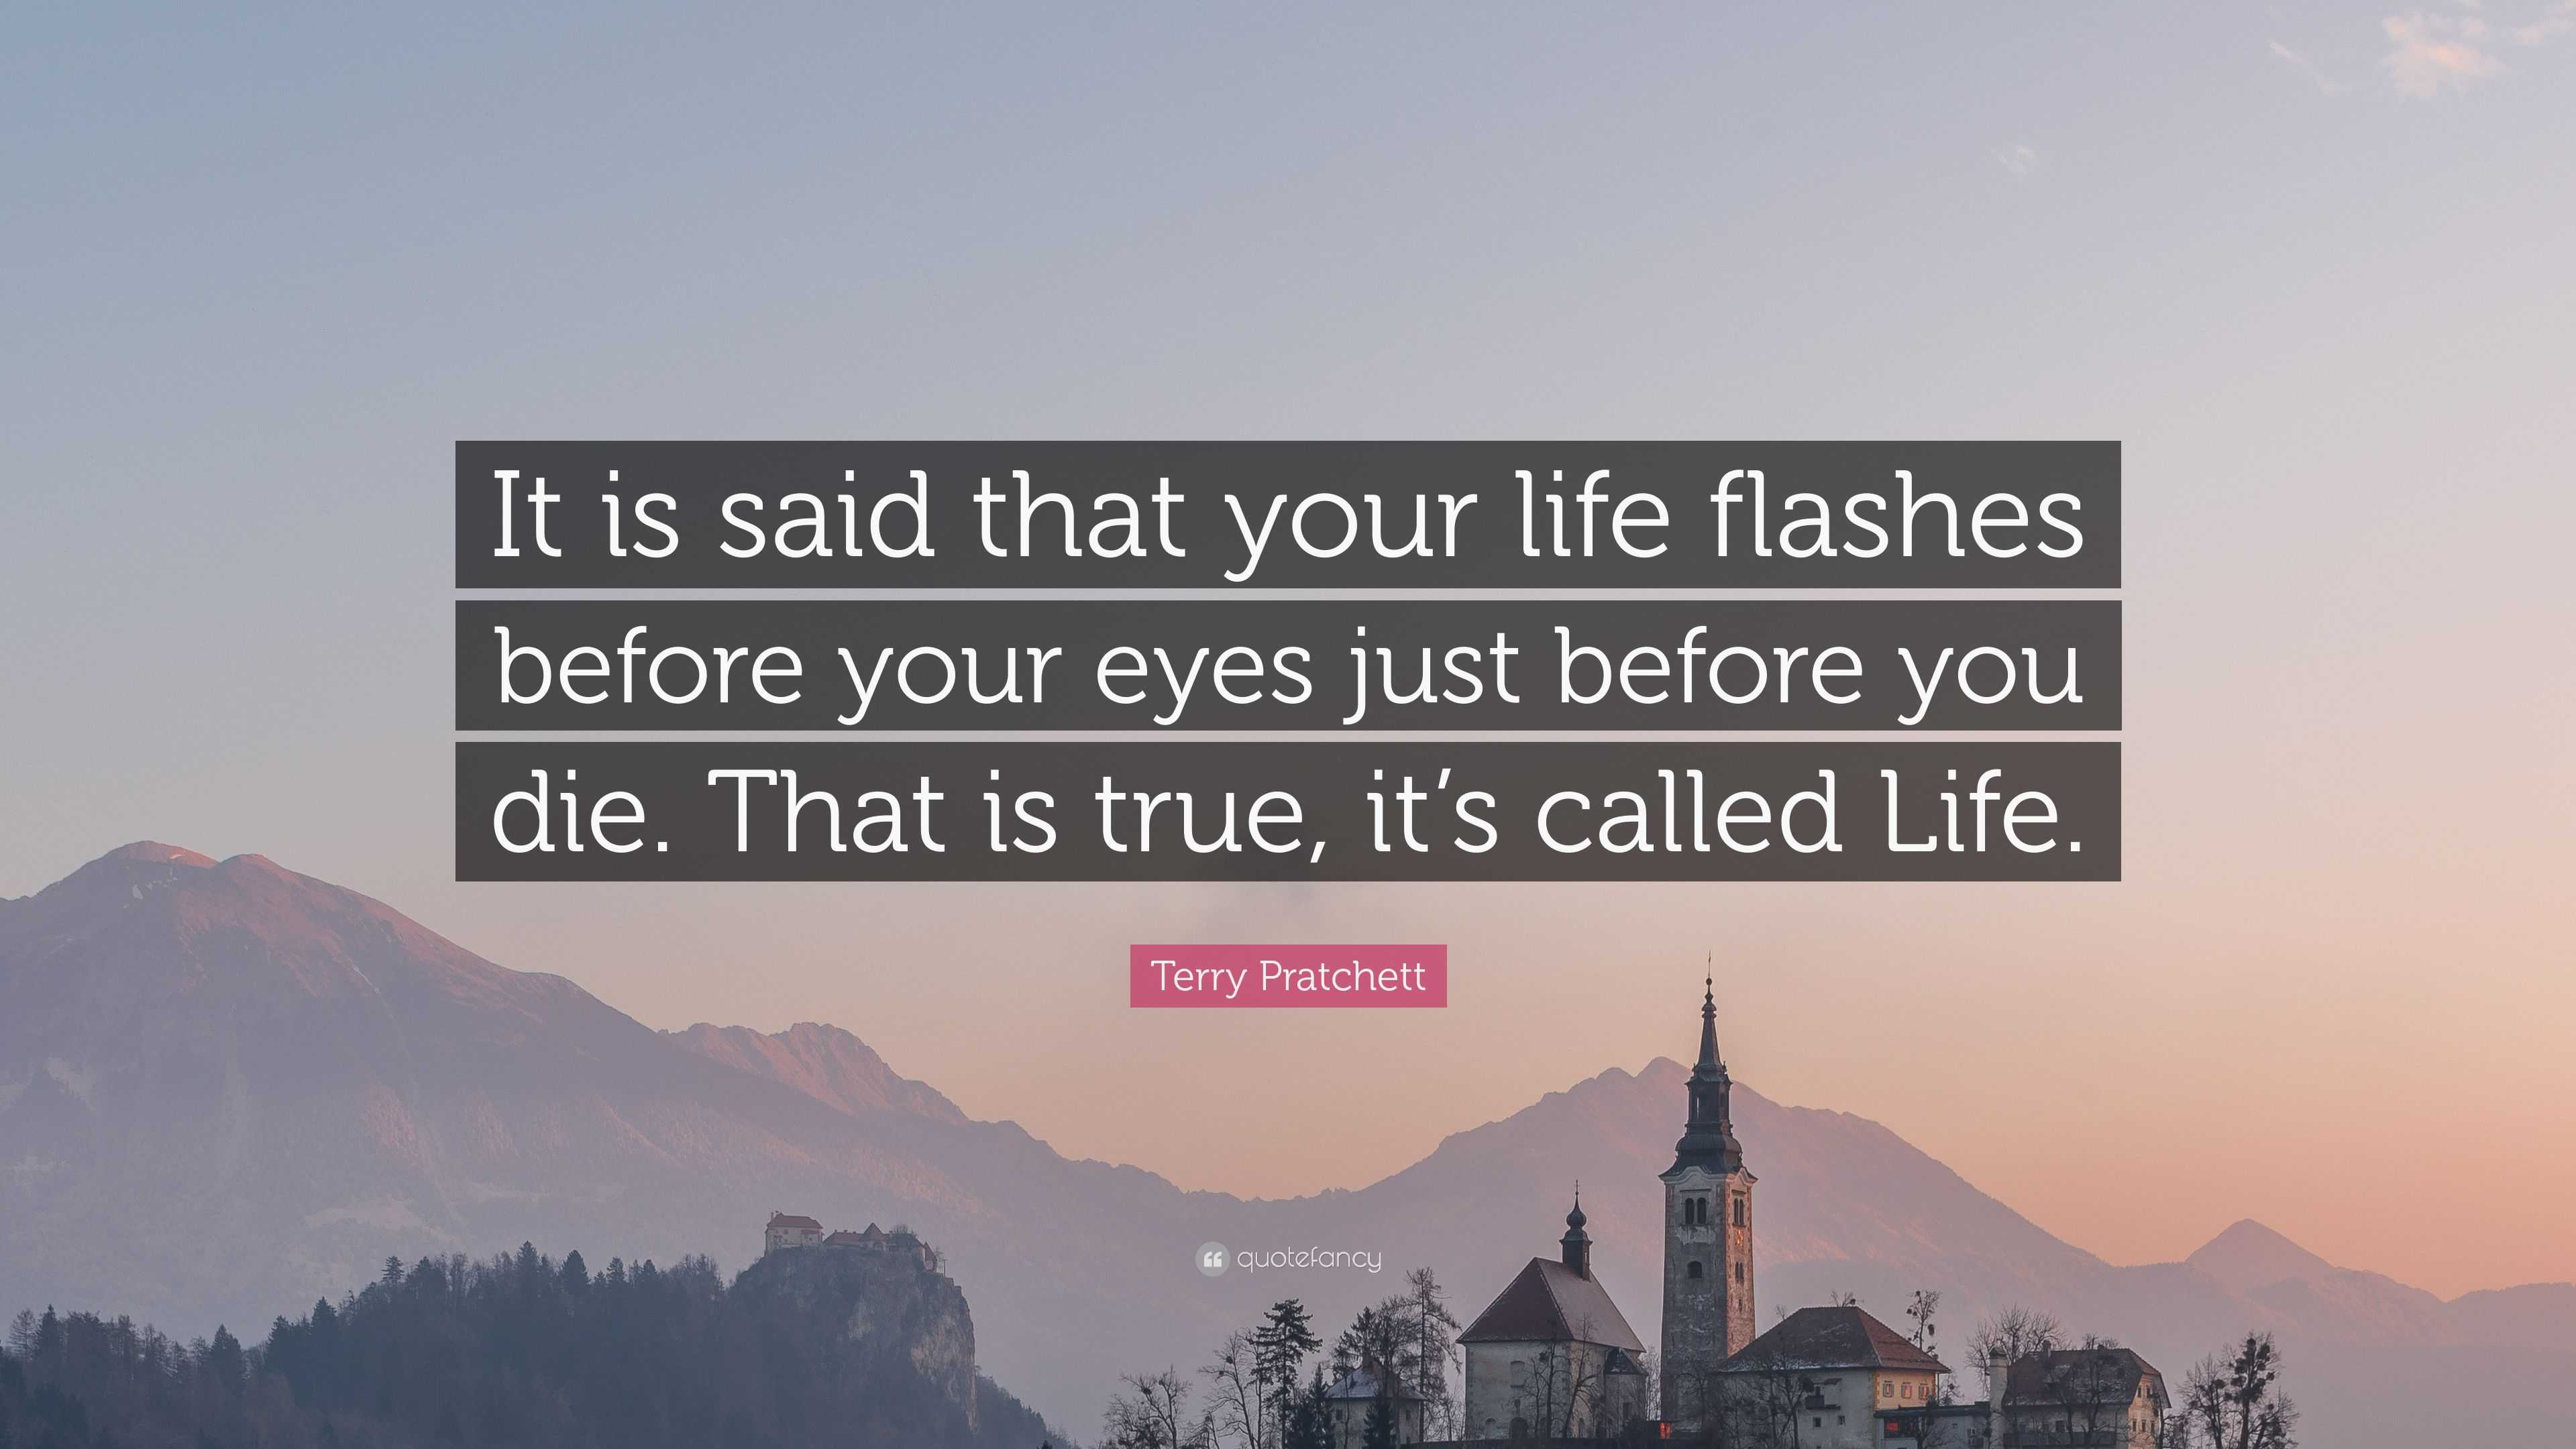 people say life flashes before your eyes